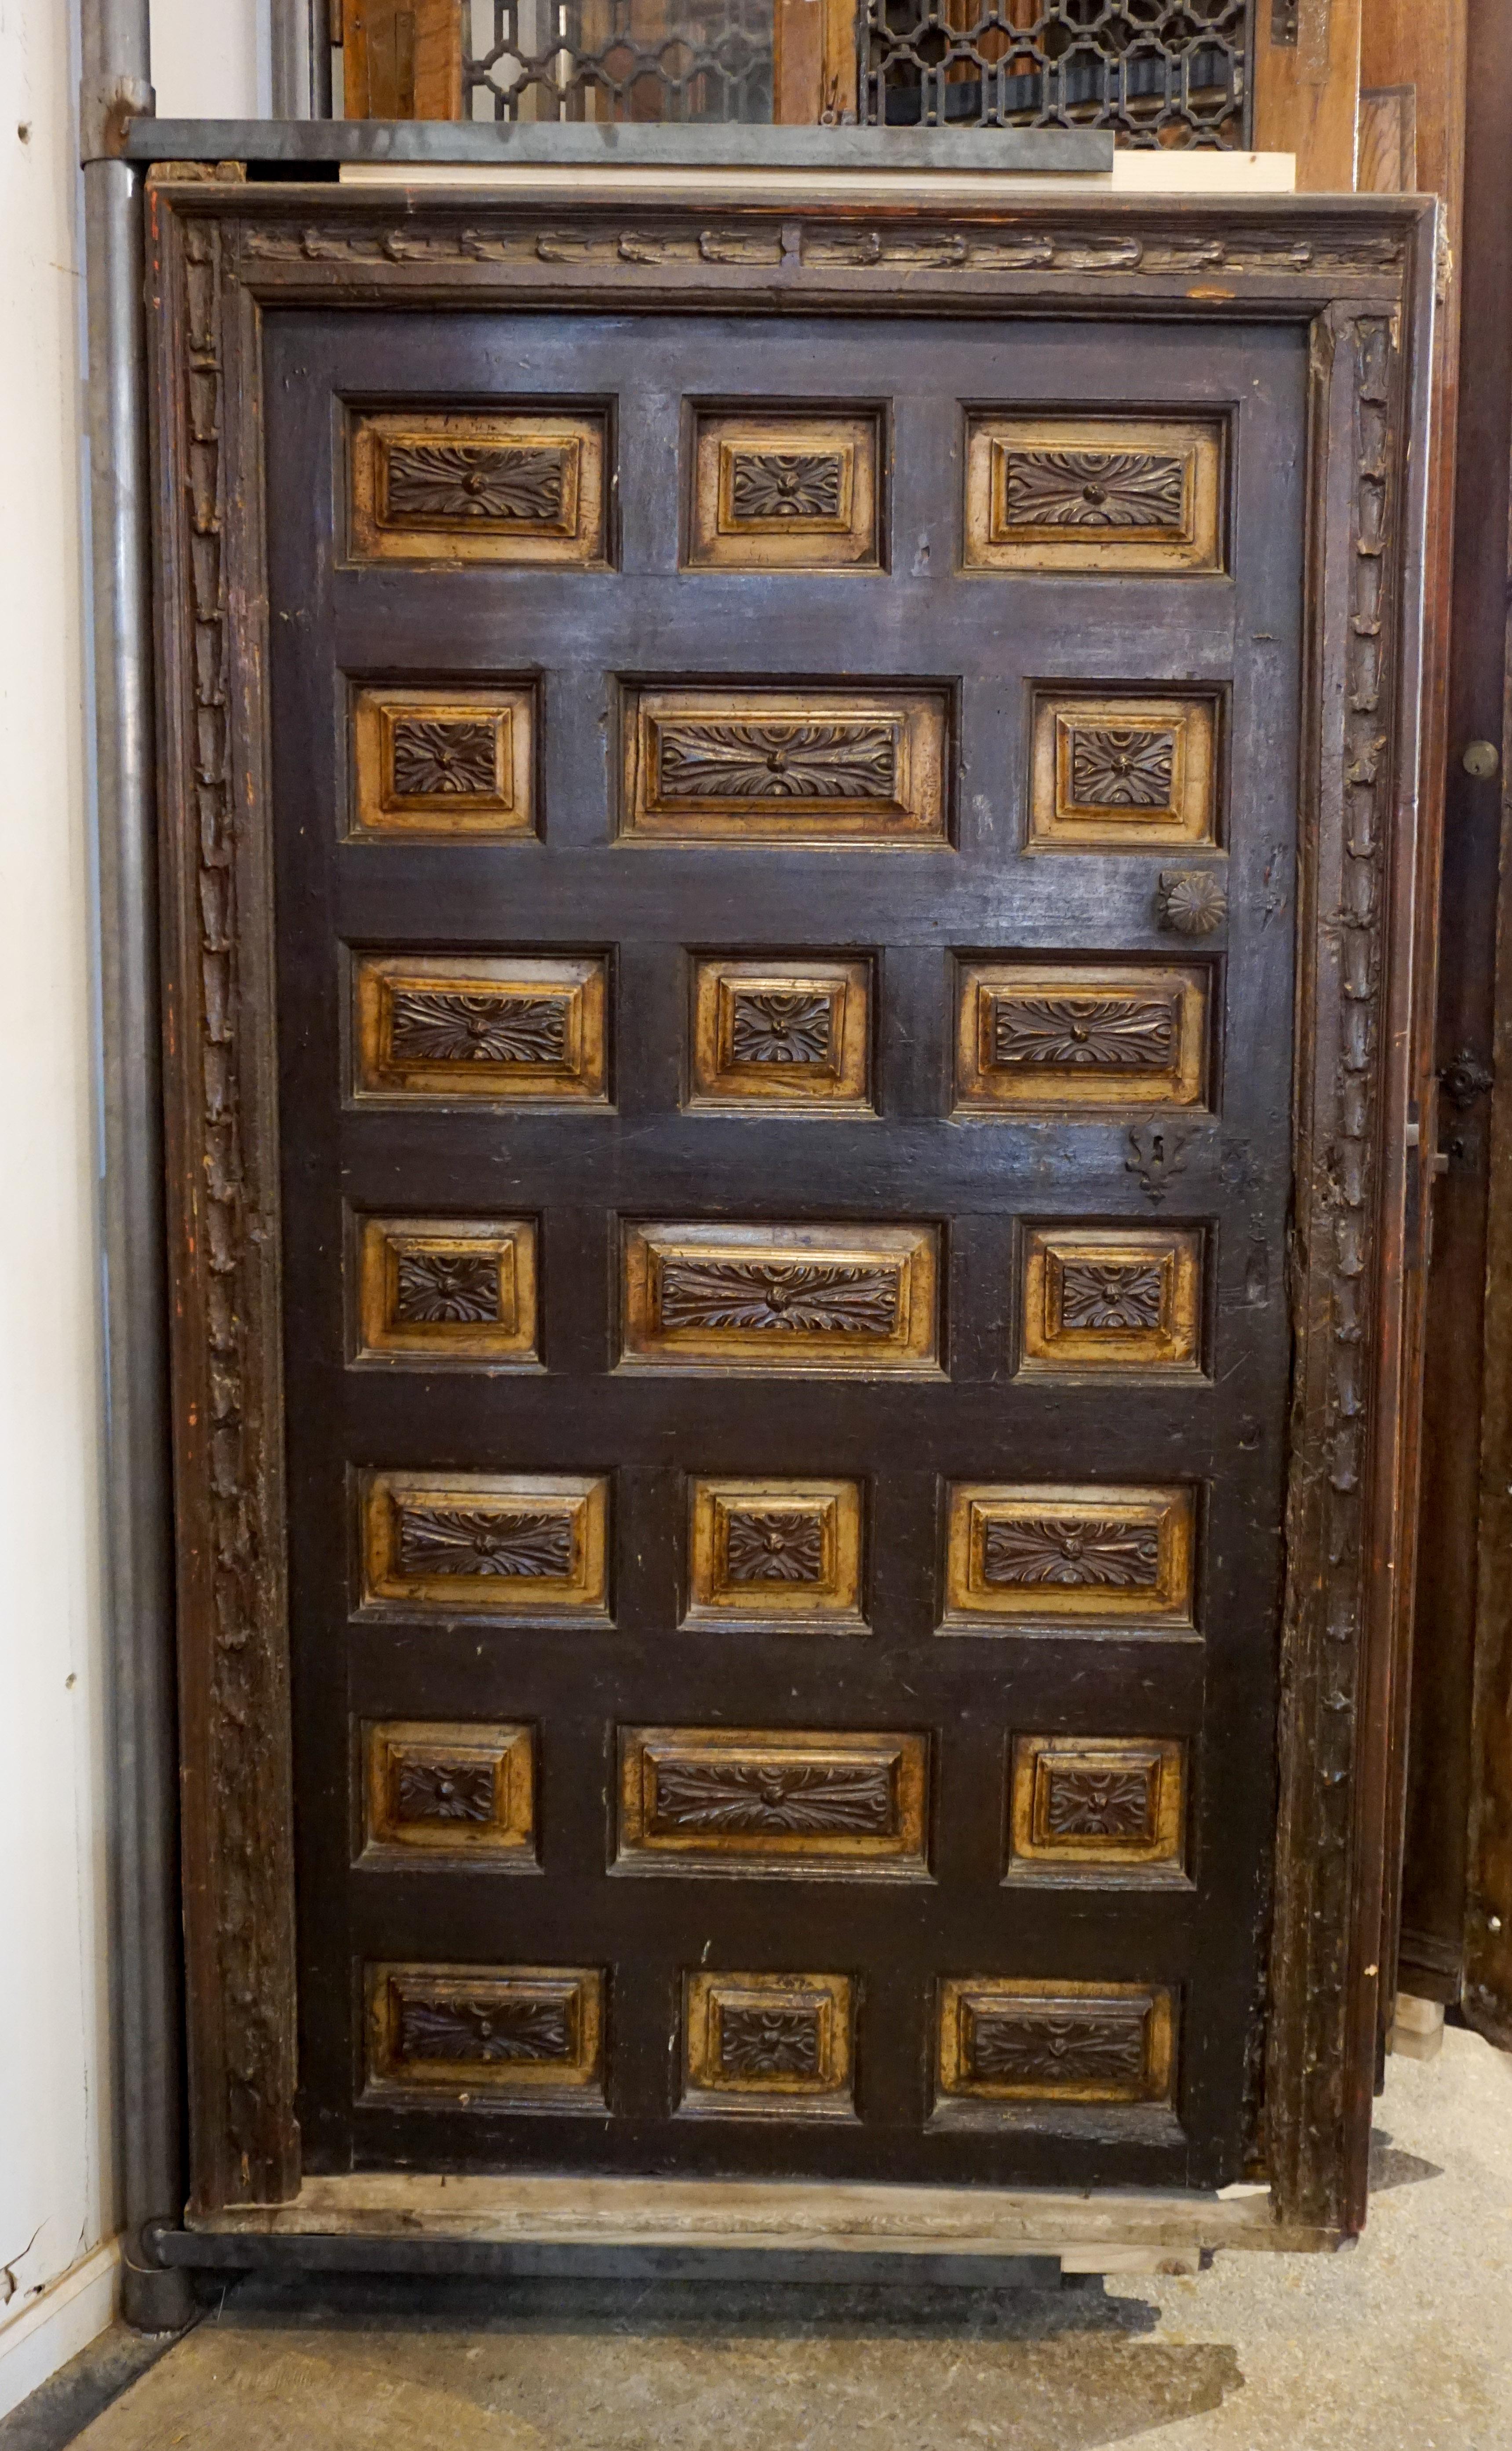 Spanish single door adorned with carved decorative inset panels as well as a carved frame. 

Origin: Spain, circa 17th Century

Measurements: 78 1/2